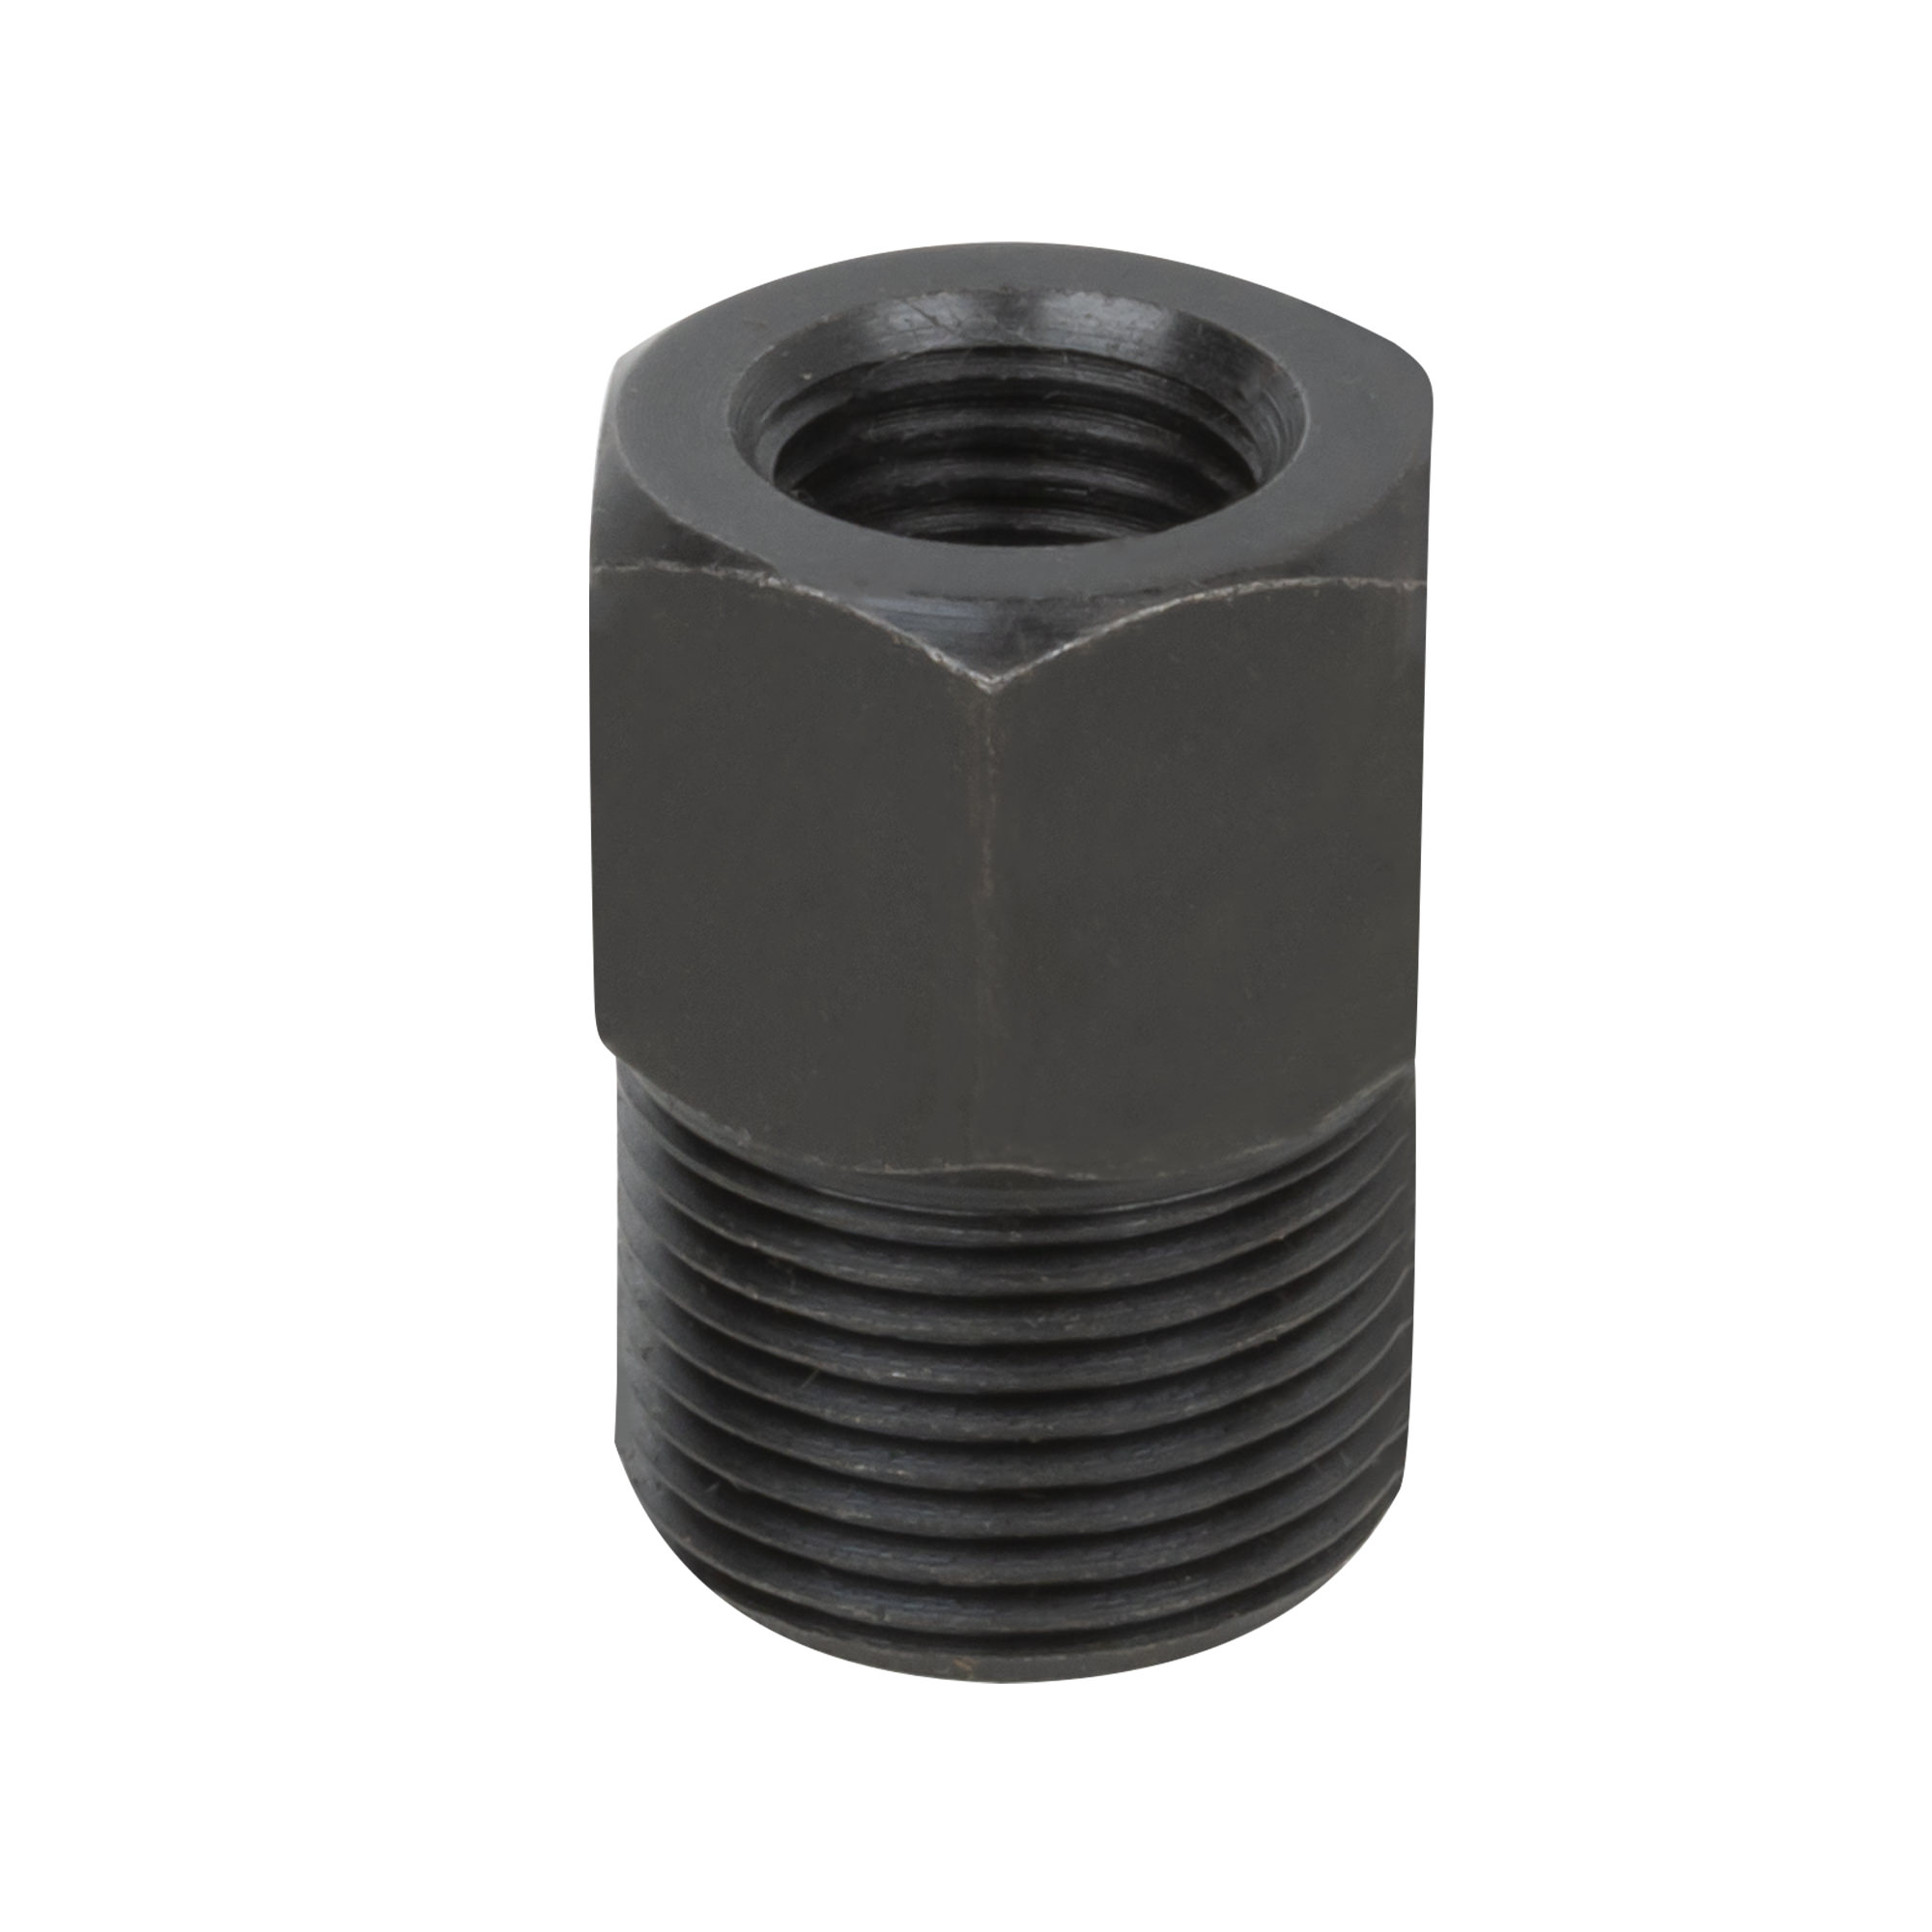 ADAPTER M22X1,5 15MM FOR INJECTOR PULLER 54186